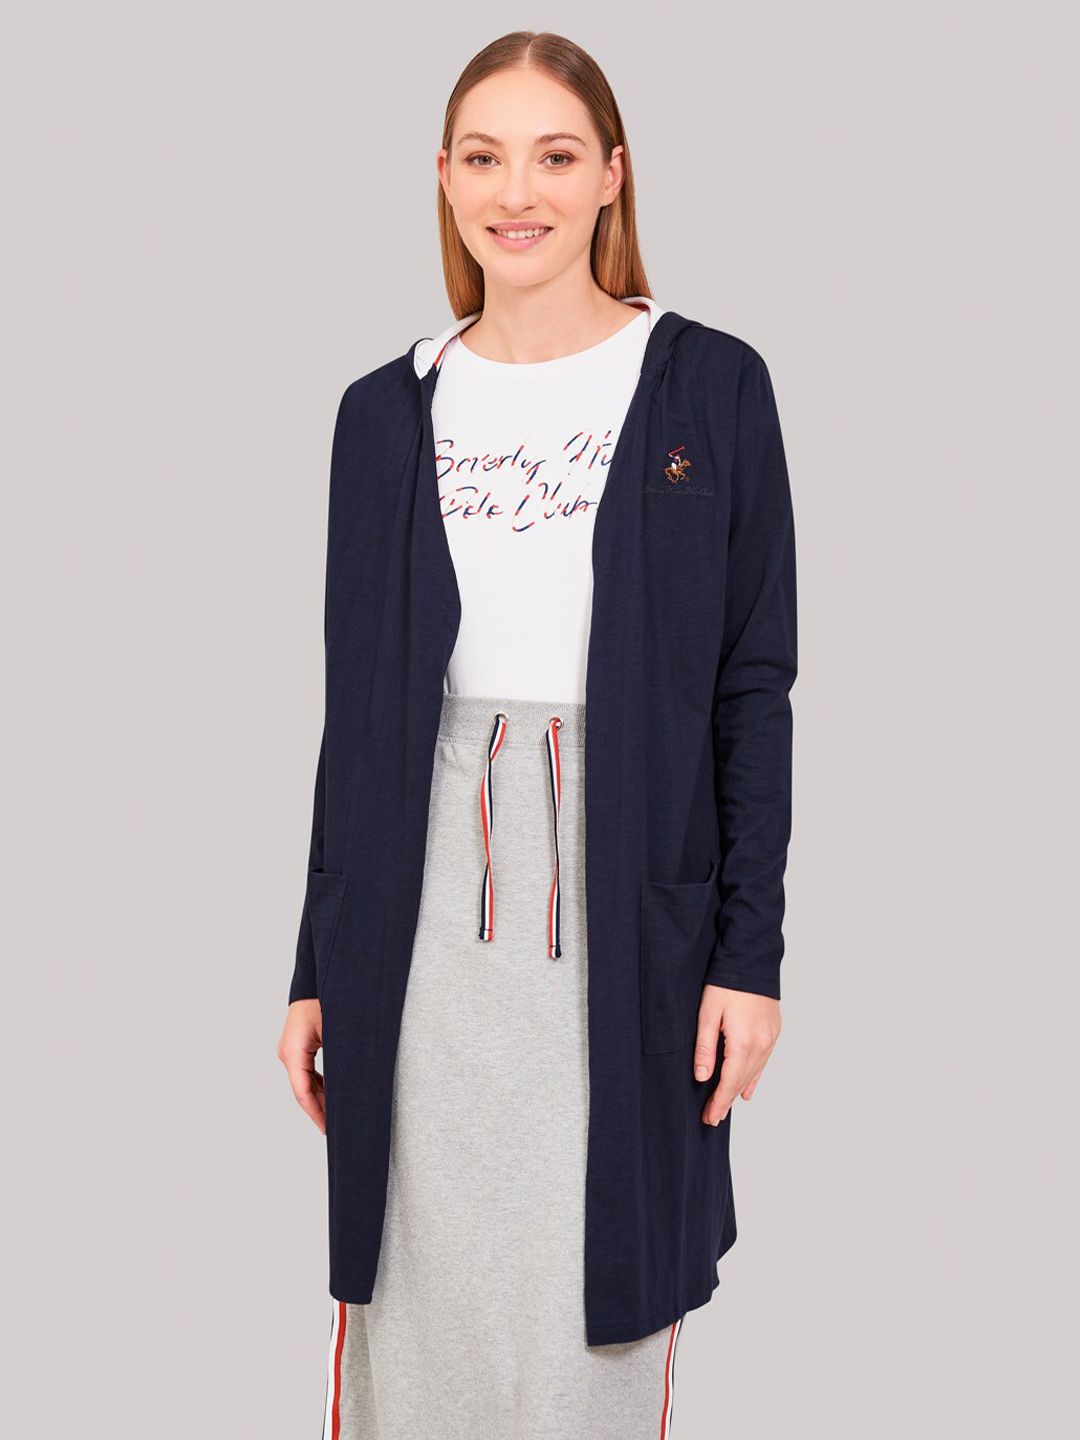 Beverly Hills Polo Club Women Navy Blue Longline Shrug Price in India